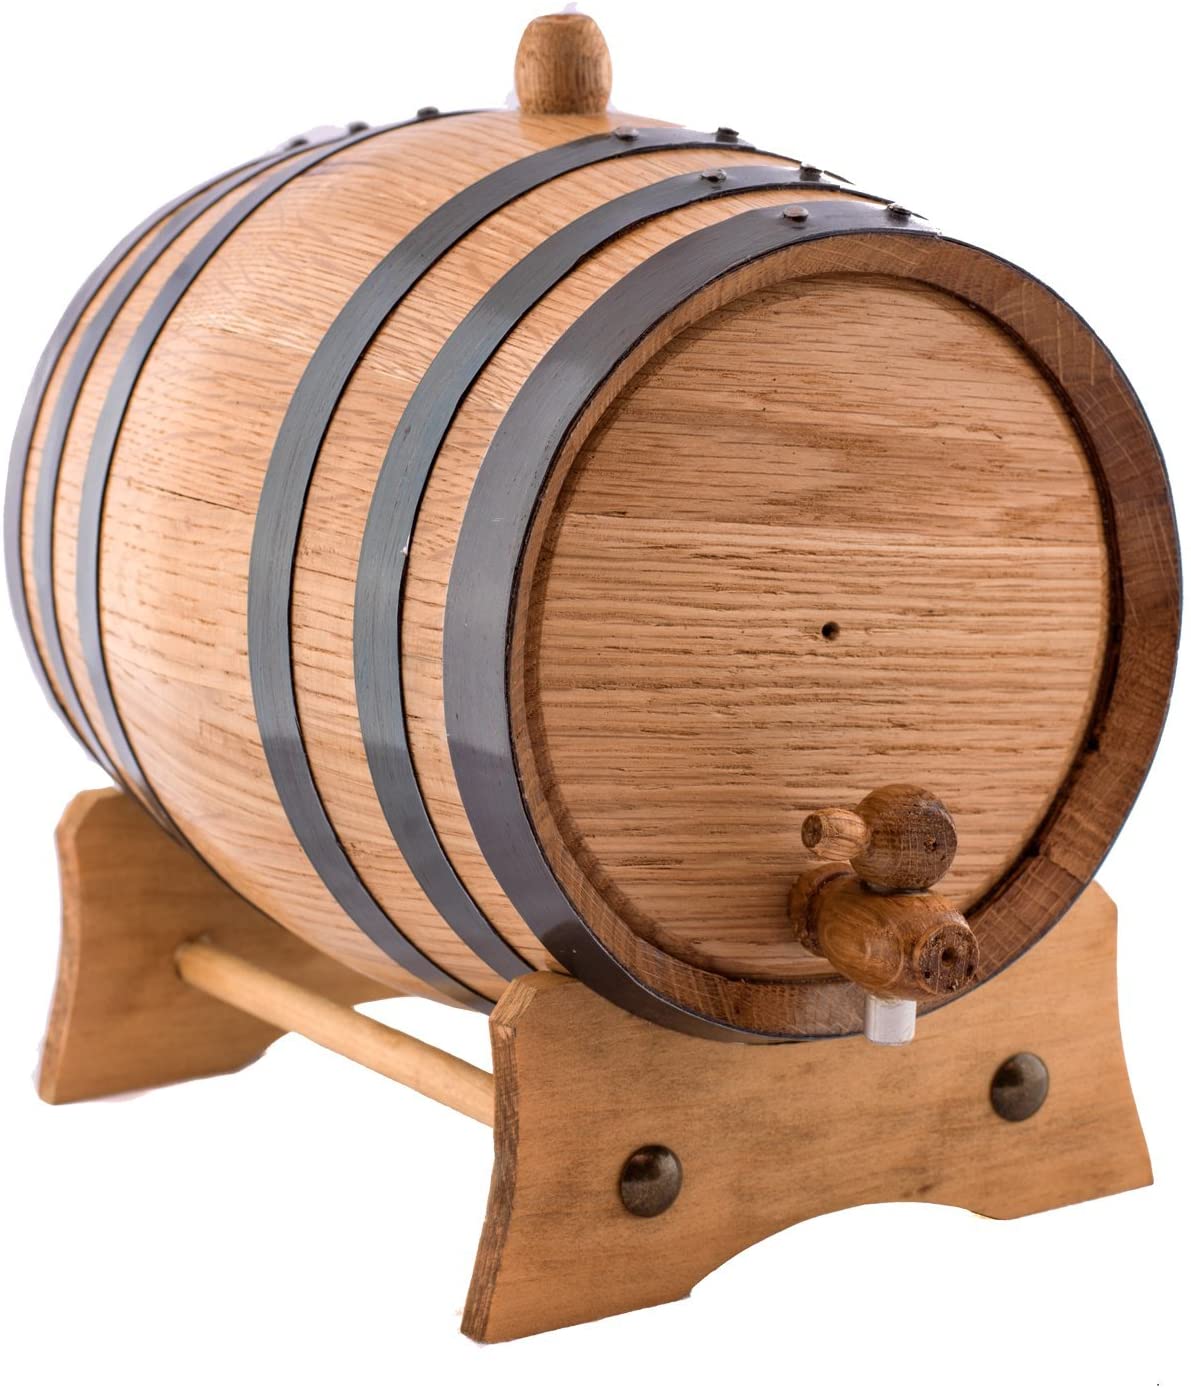 2 Liters American Oak Aging Whiskey Barrel | Handcrafted using American White Oak | Age your own Whiskey, Beer, Wine, Bourbon, Tequila, Hot Sauce & More